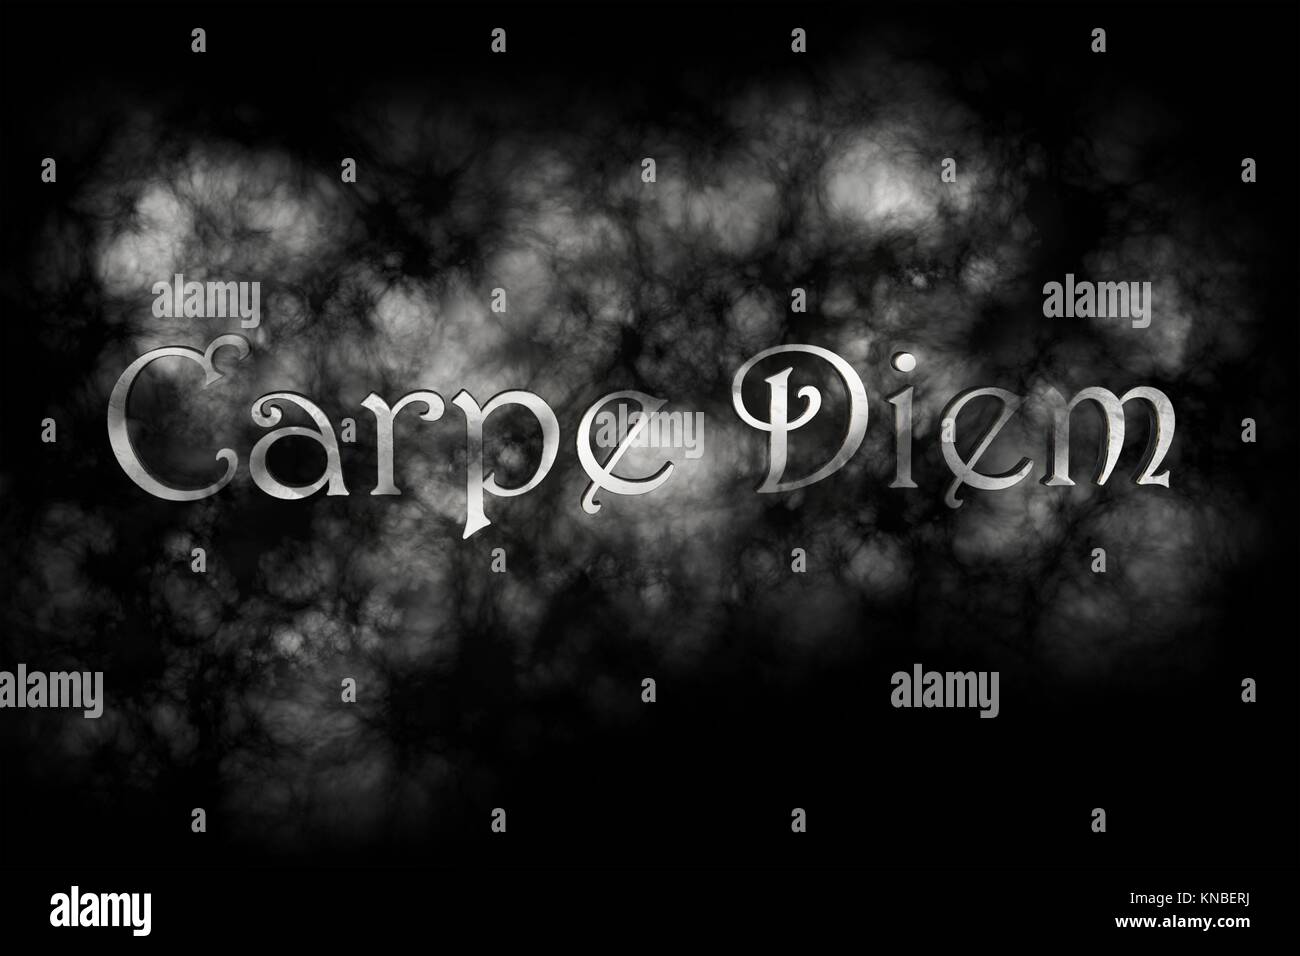 Carpe diem 3D Render- latin phrase that means Capture the moment on black background with white smoke. Stock Photo